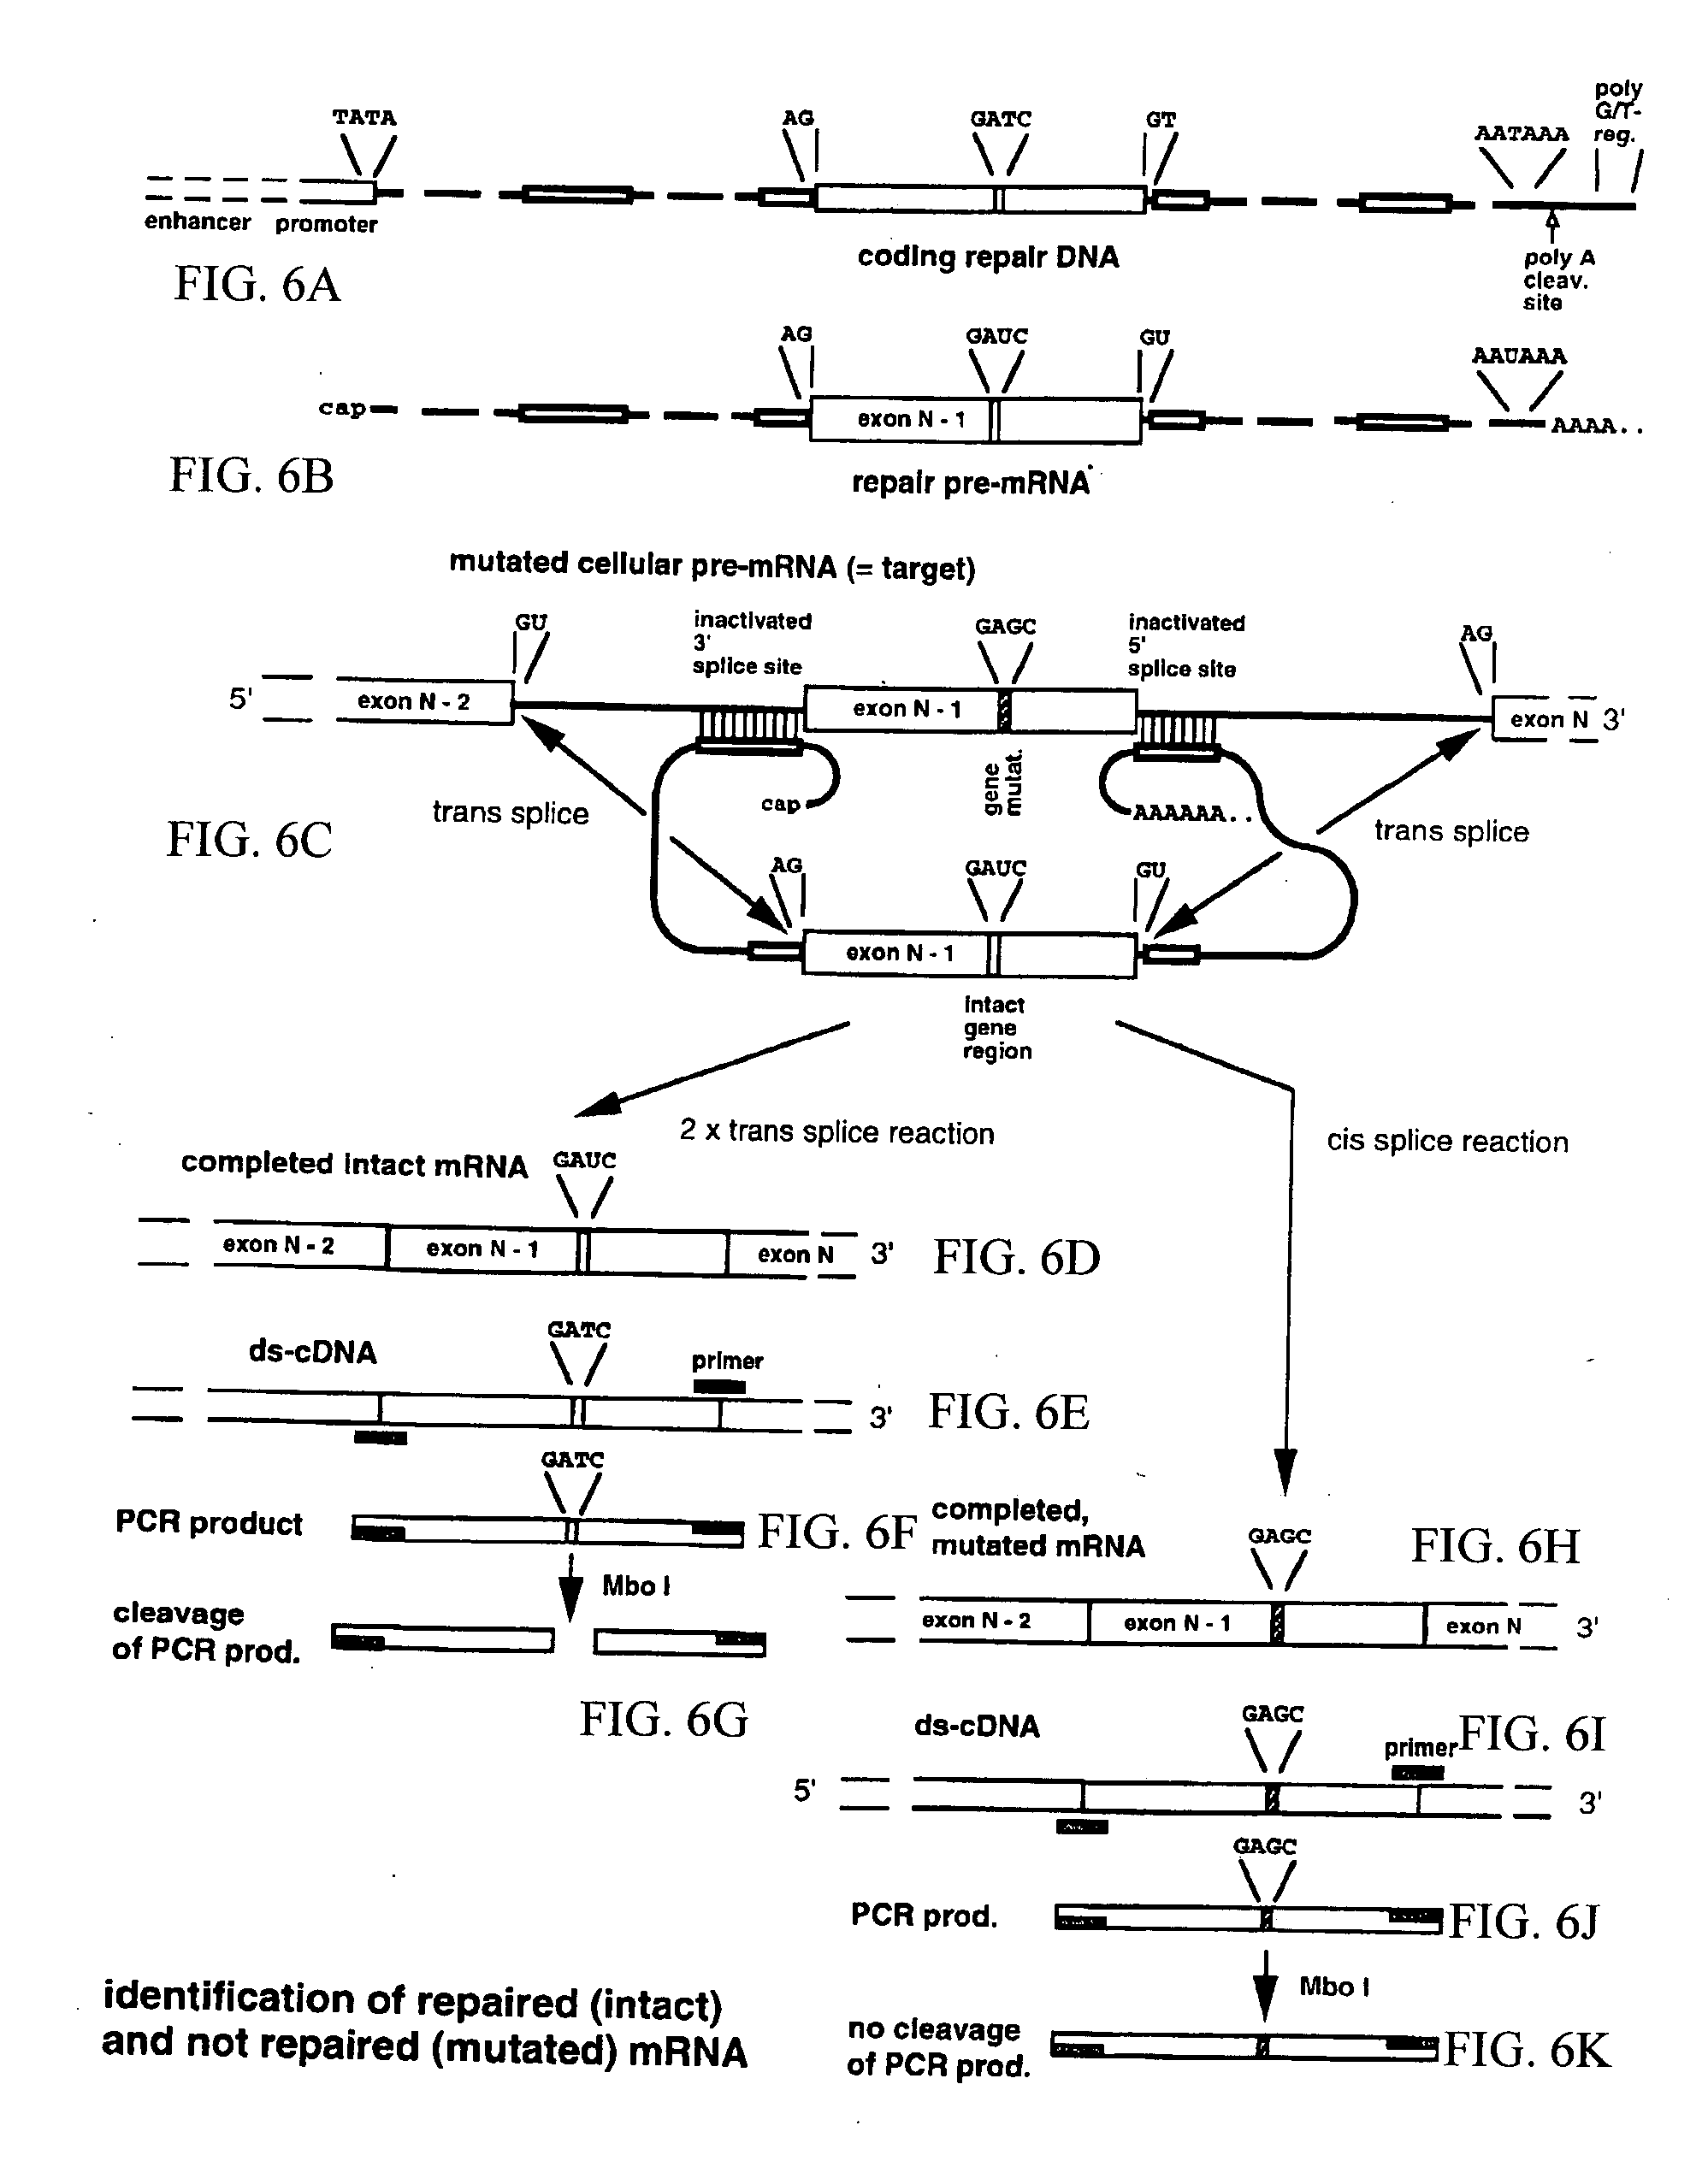 Method for the repair of mutated RNA from genetically defective DNA and for the specific destruction of tumor cells by RNA trans-splicing, and a method for the detection of naturally trans-spliced cellular RNA